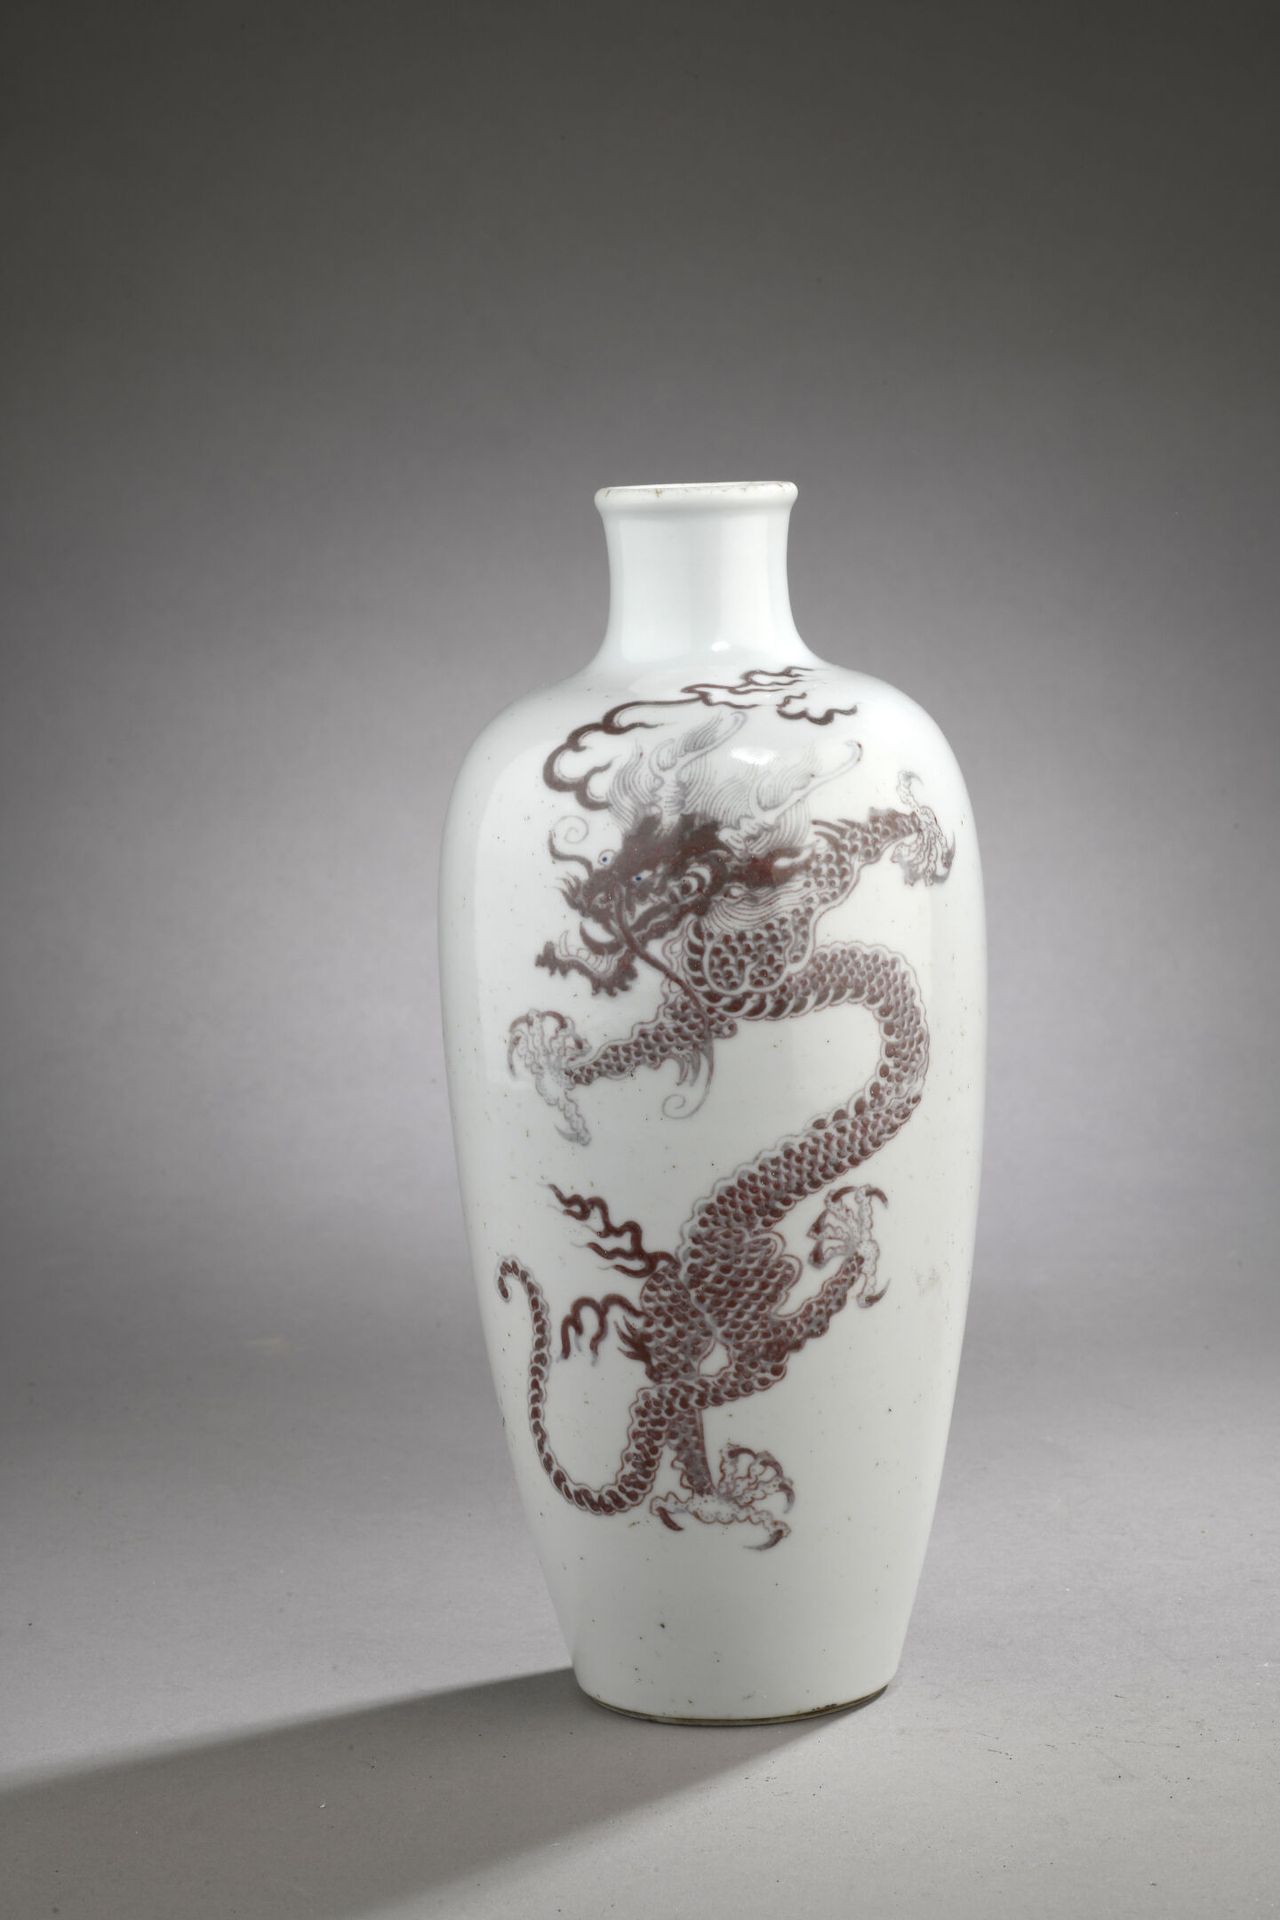 Null Porcelain meiping vase with dragon design, China, early 20th century
The tw&hellip;